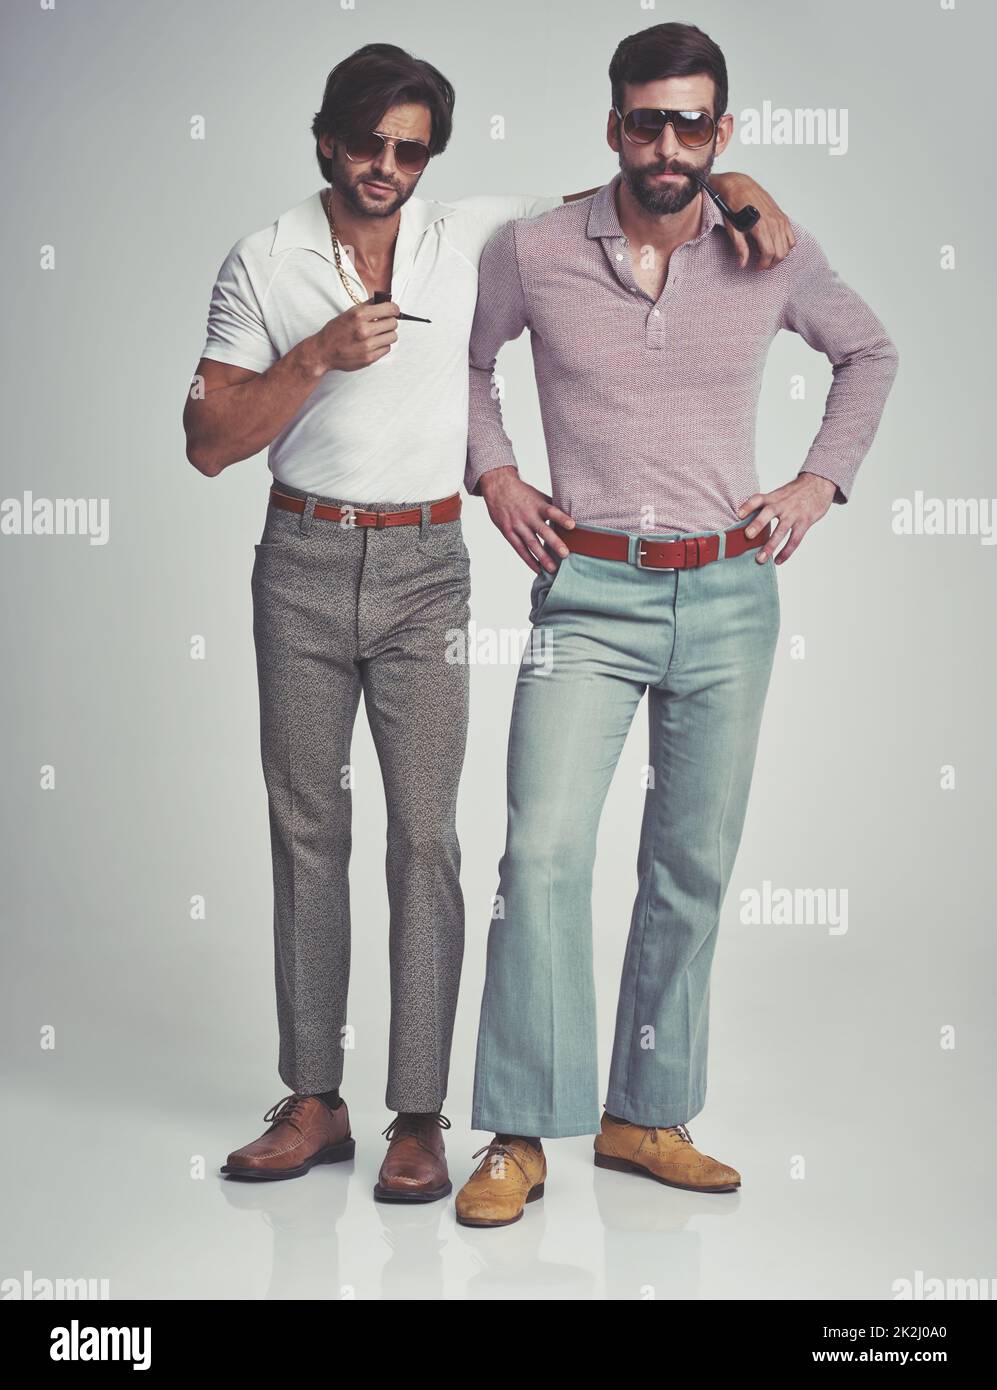 Studio shot of two men standing together while wearing retro 70s wear and smoking pipes Stock Photo